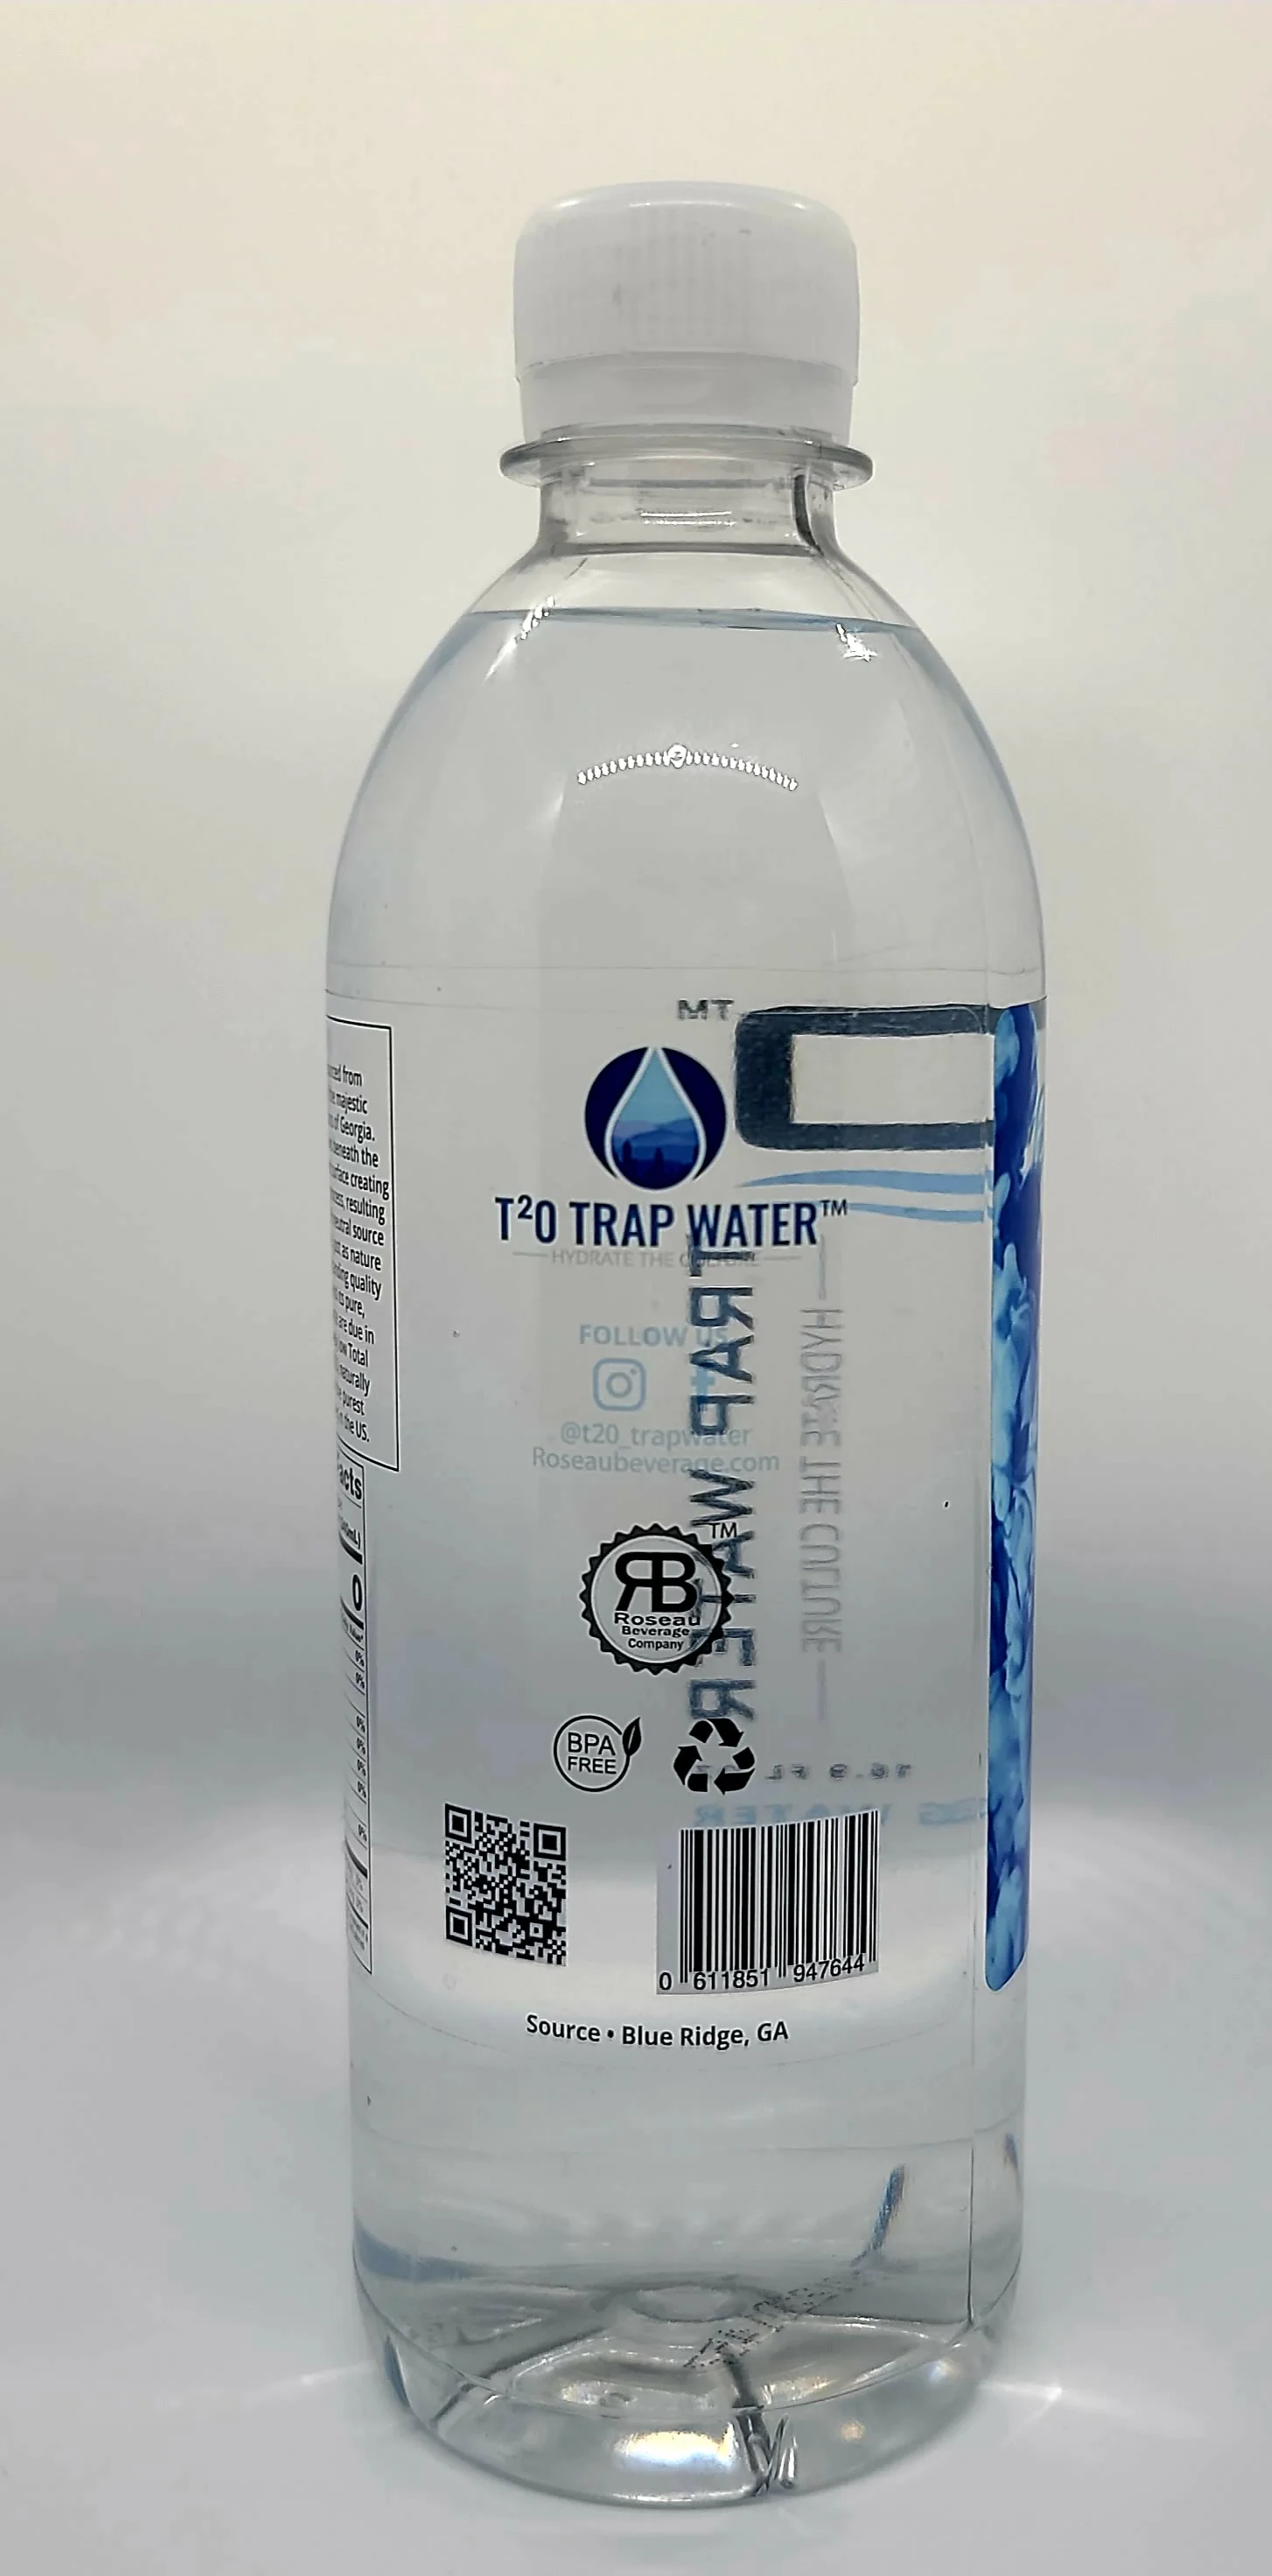 
Unique Pure Refreshing Pure Nature Hydration T20 Trap Water 16.9 FL OZ & 20 FL OZ 100% ALL Natural Spring Water 